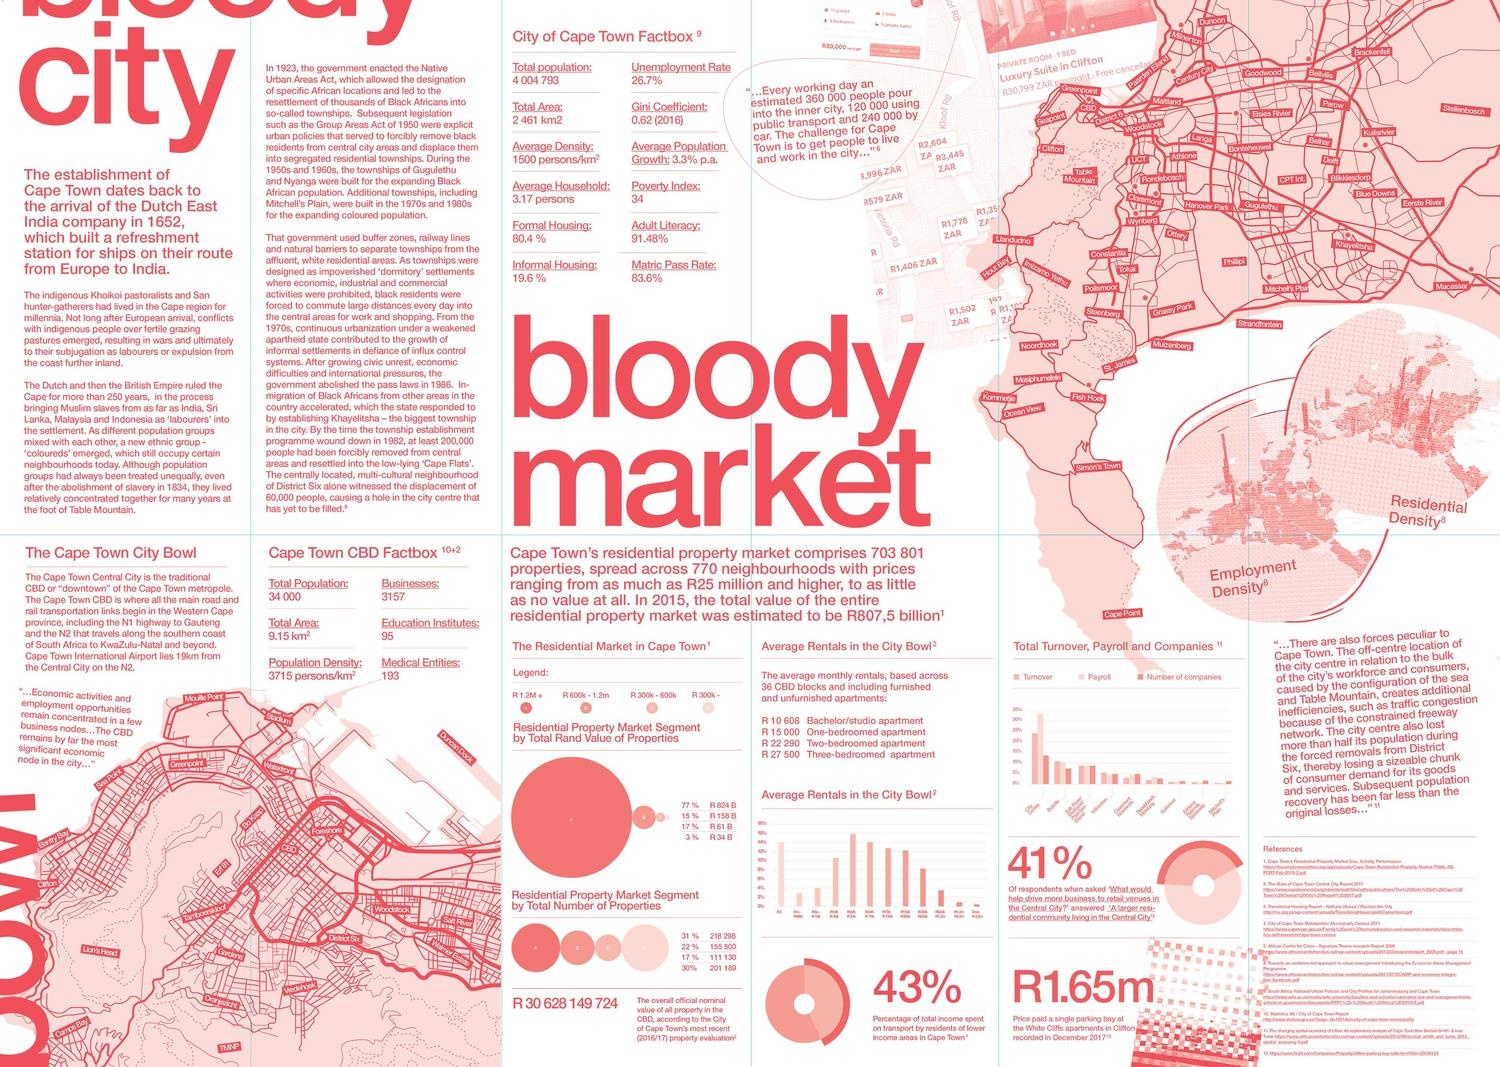 Ephemera from the ‘Unit 11 - Bloody Agency’ exchange with students from the University of Johannesburg’s Graduate School of Architecture on A4’s top floor. A white poster features map fragments of Cape Town and text in red and pink, one prominent heading reading ‘bloody market.’
